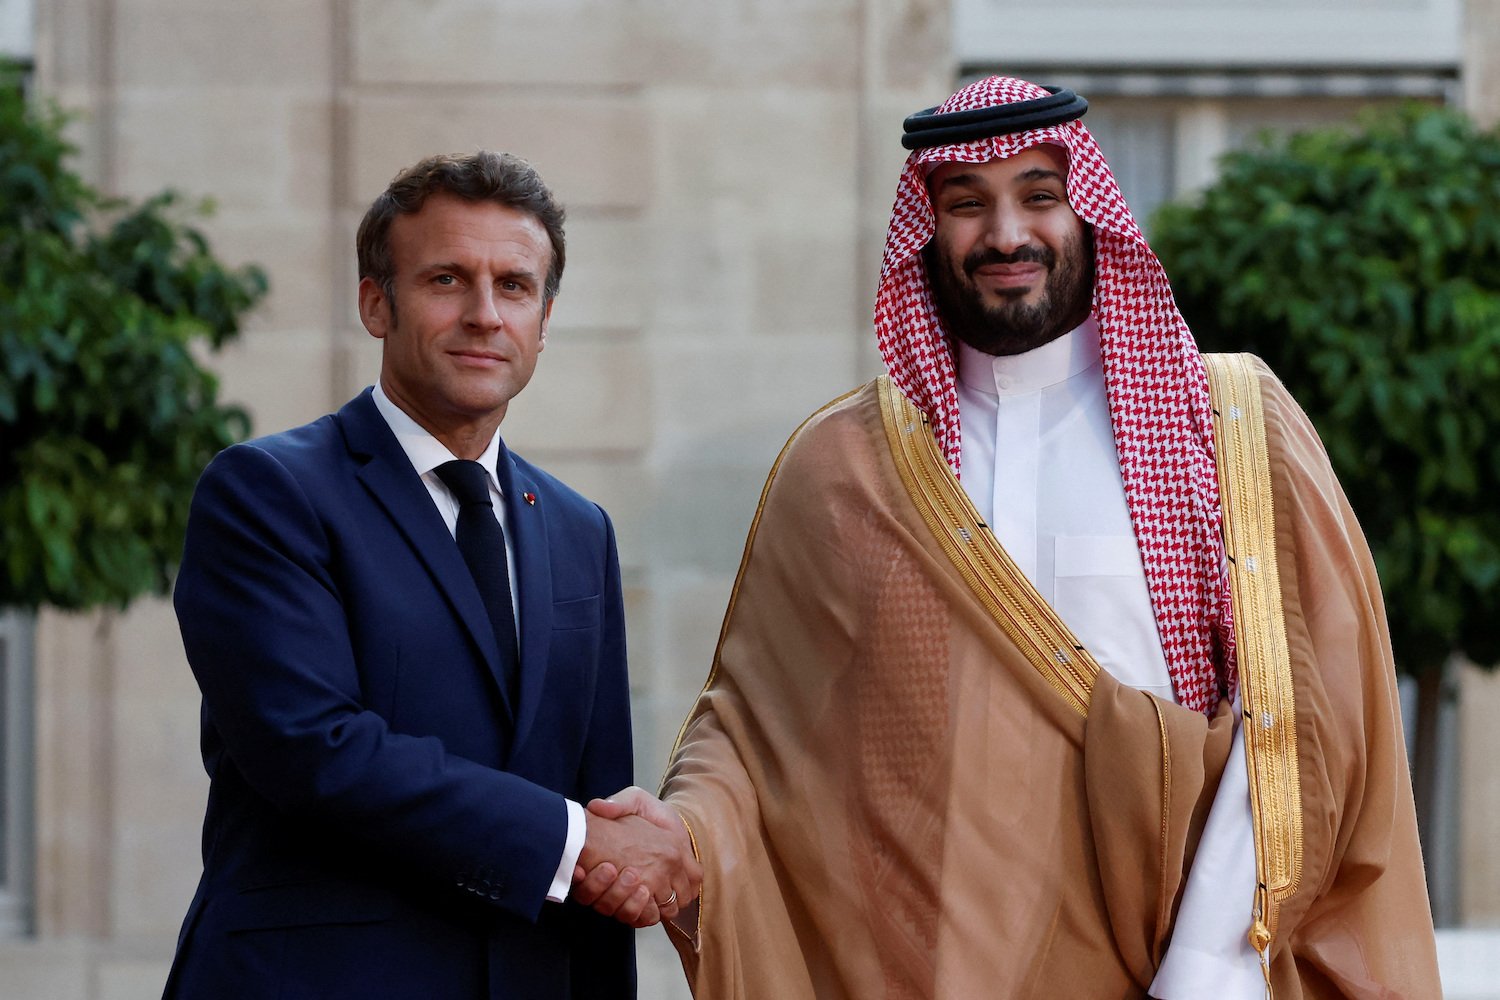 French president receives Saudi crown prince at Elysee Palace